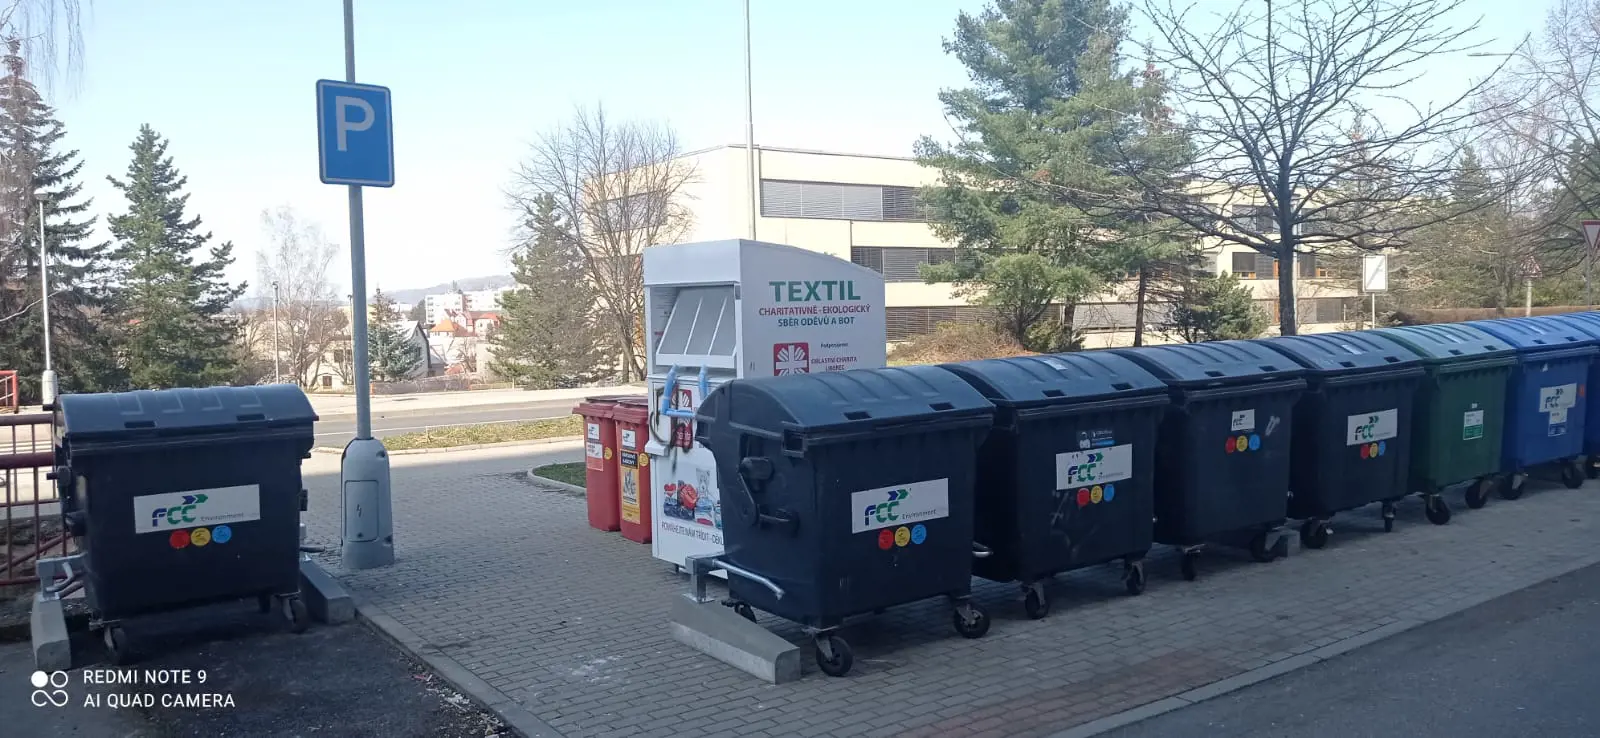 Hundreds of mobile sites for separated waste containers have been set up in Liberec